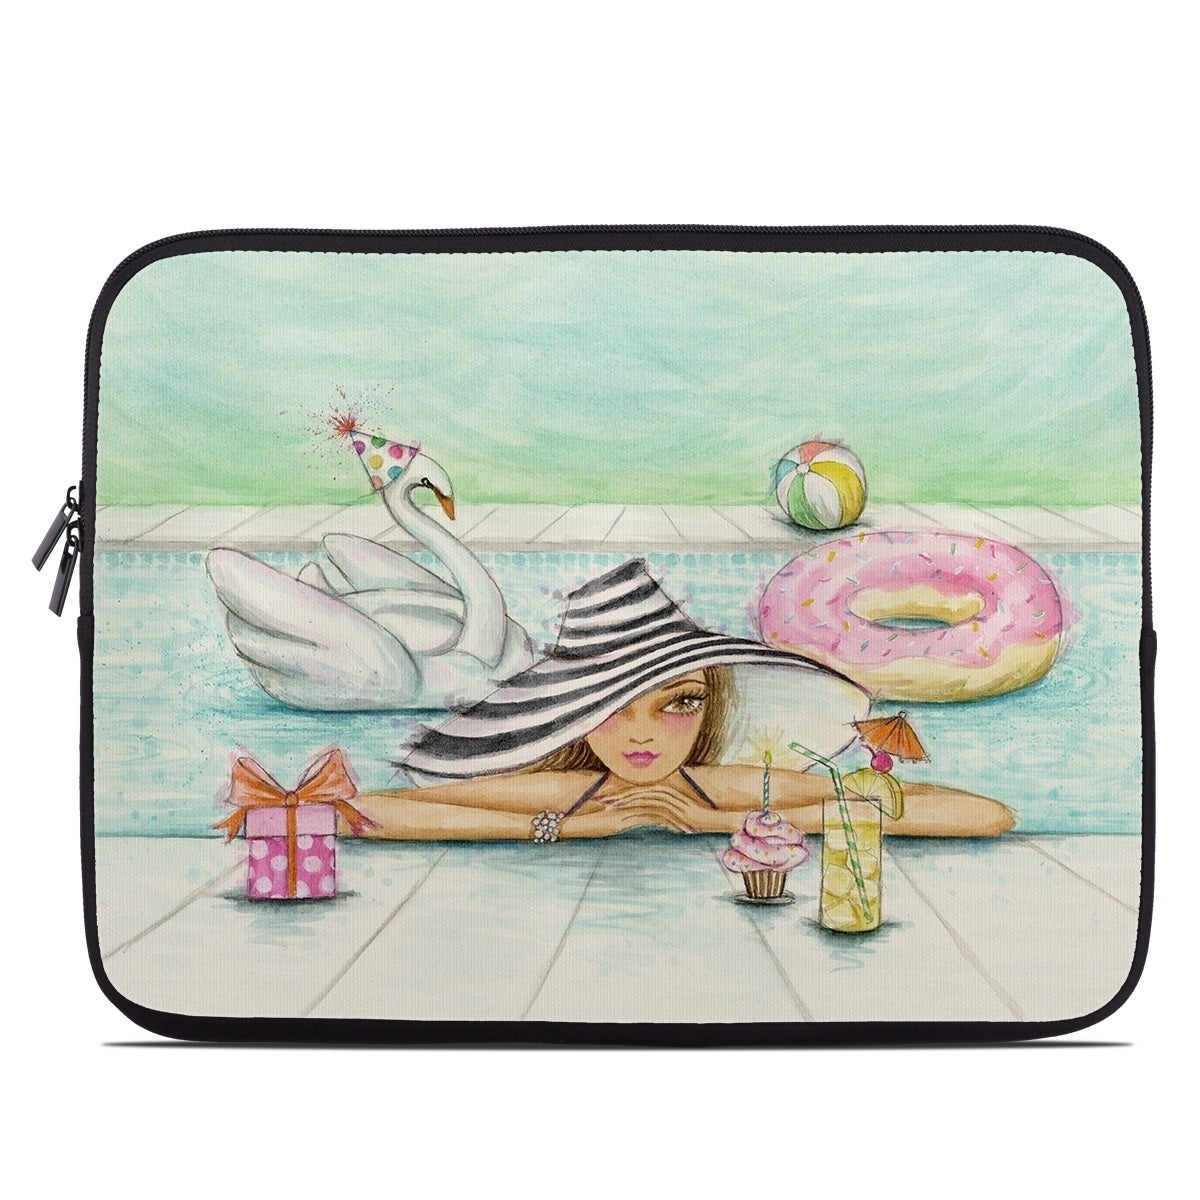 Delphine at the Pool Party - Laptop Sleeve